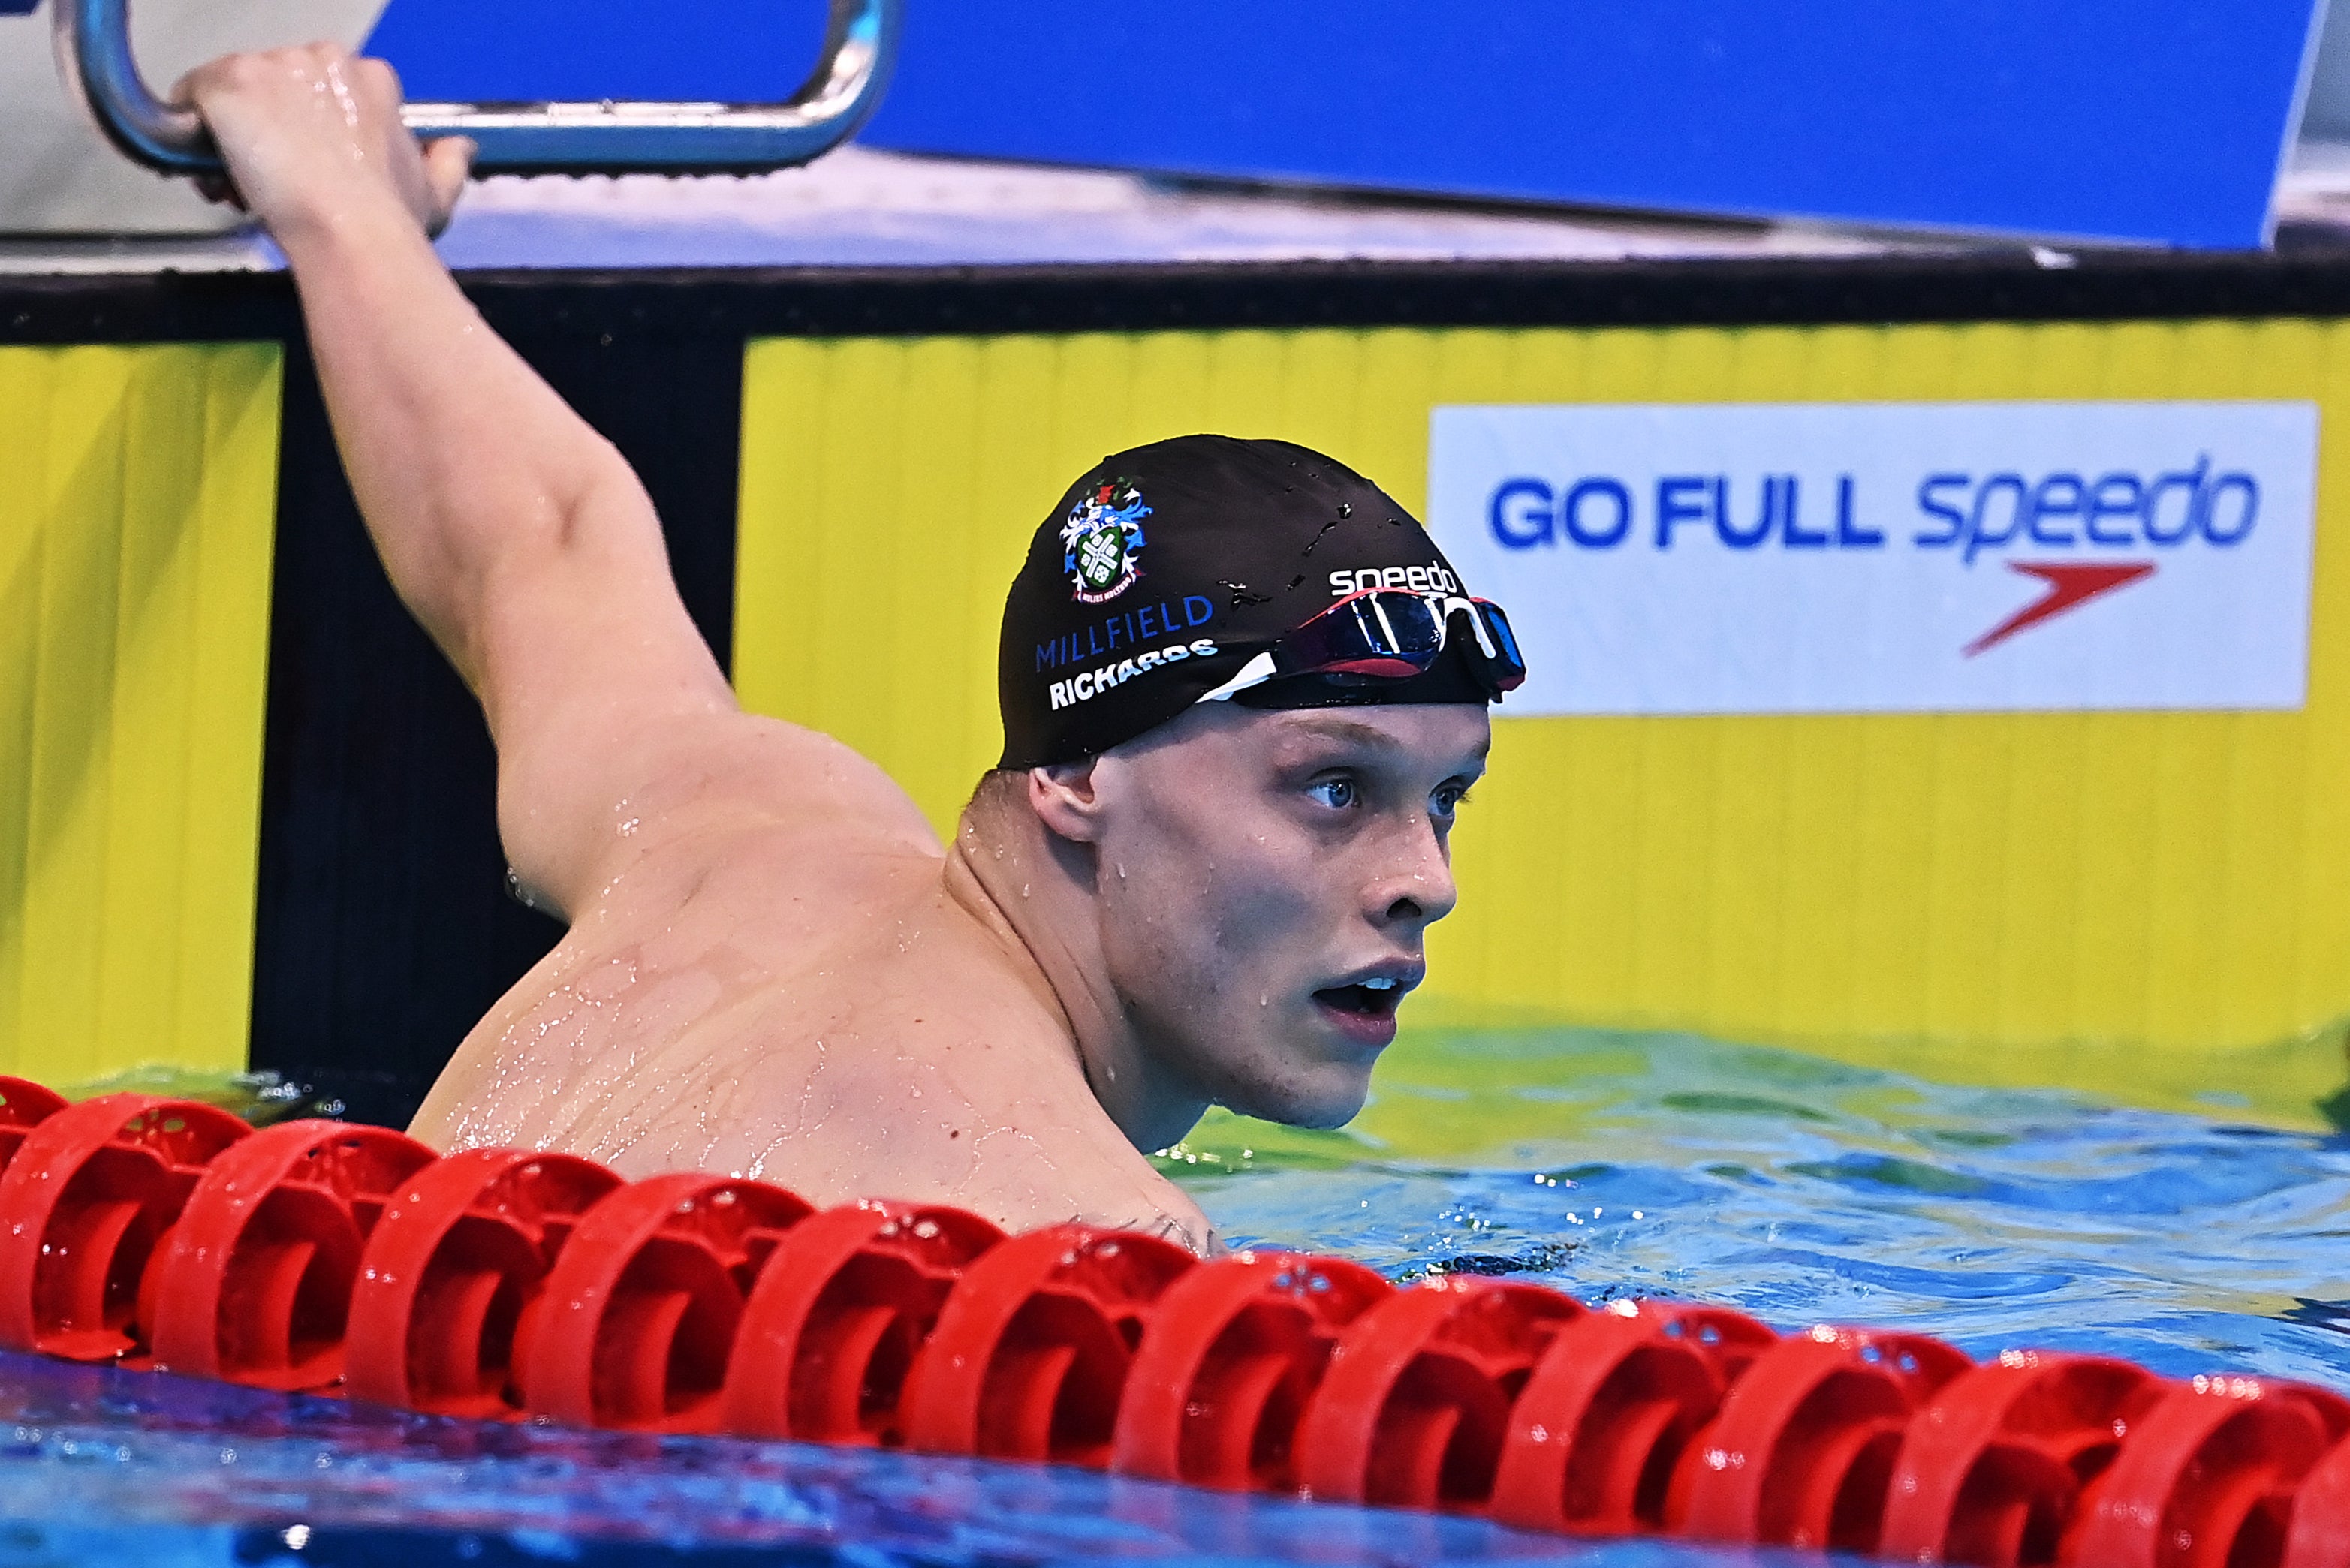 Matt Richards took victory in a thrilling men’s 200m freestyle final